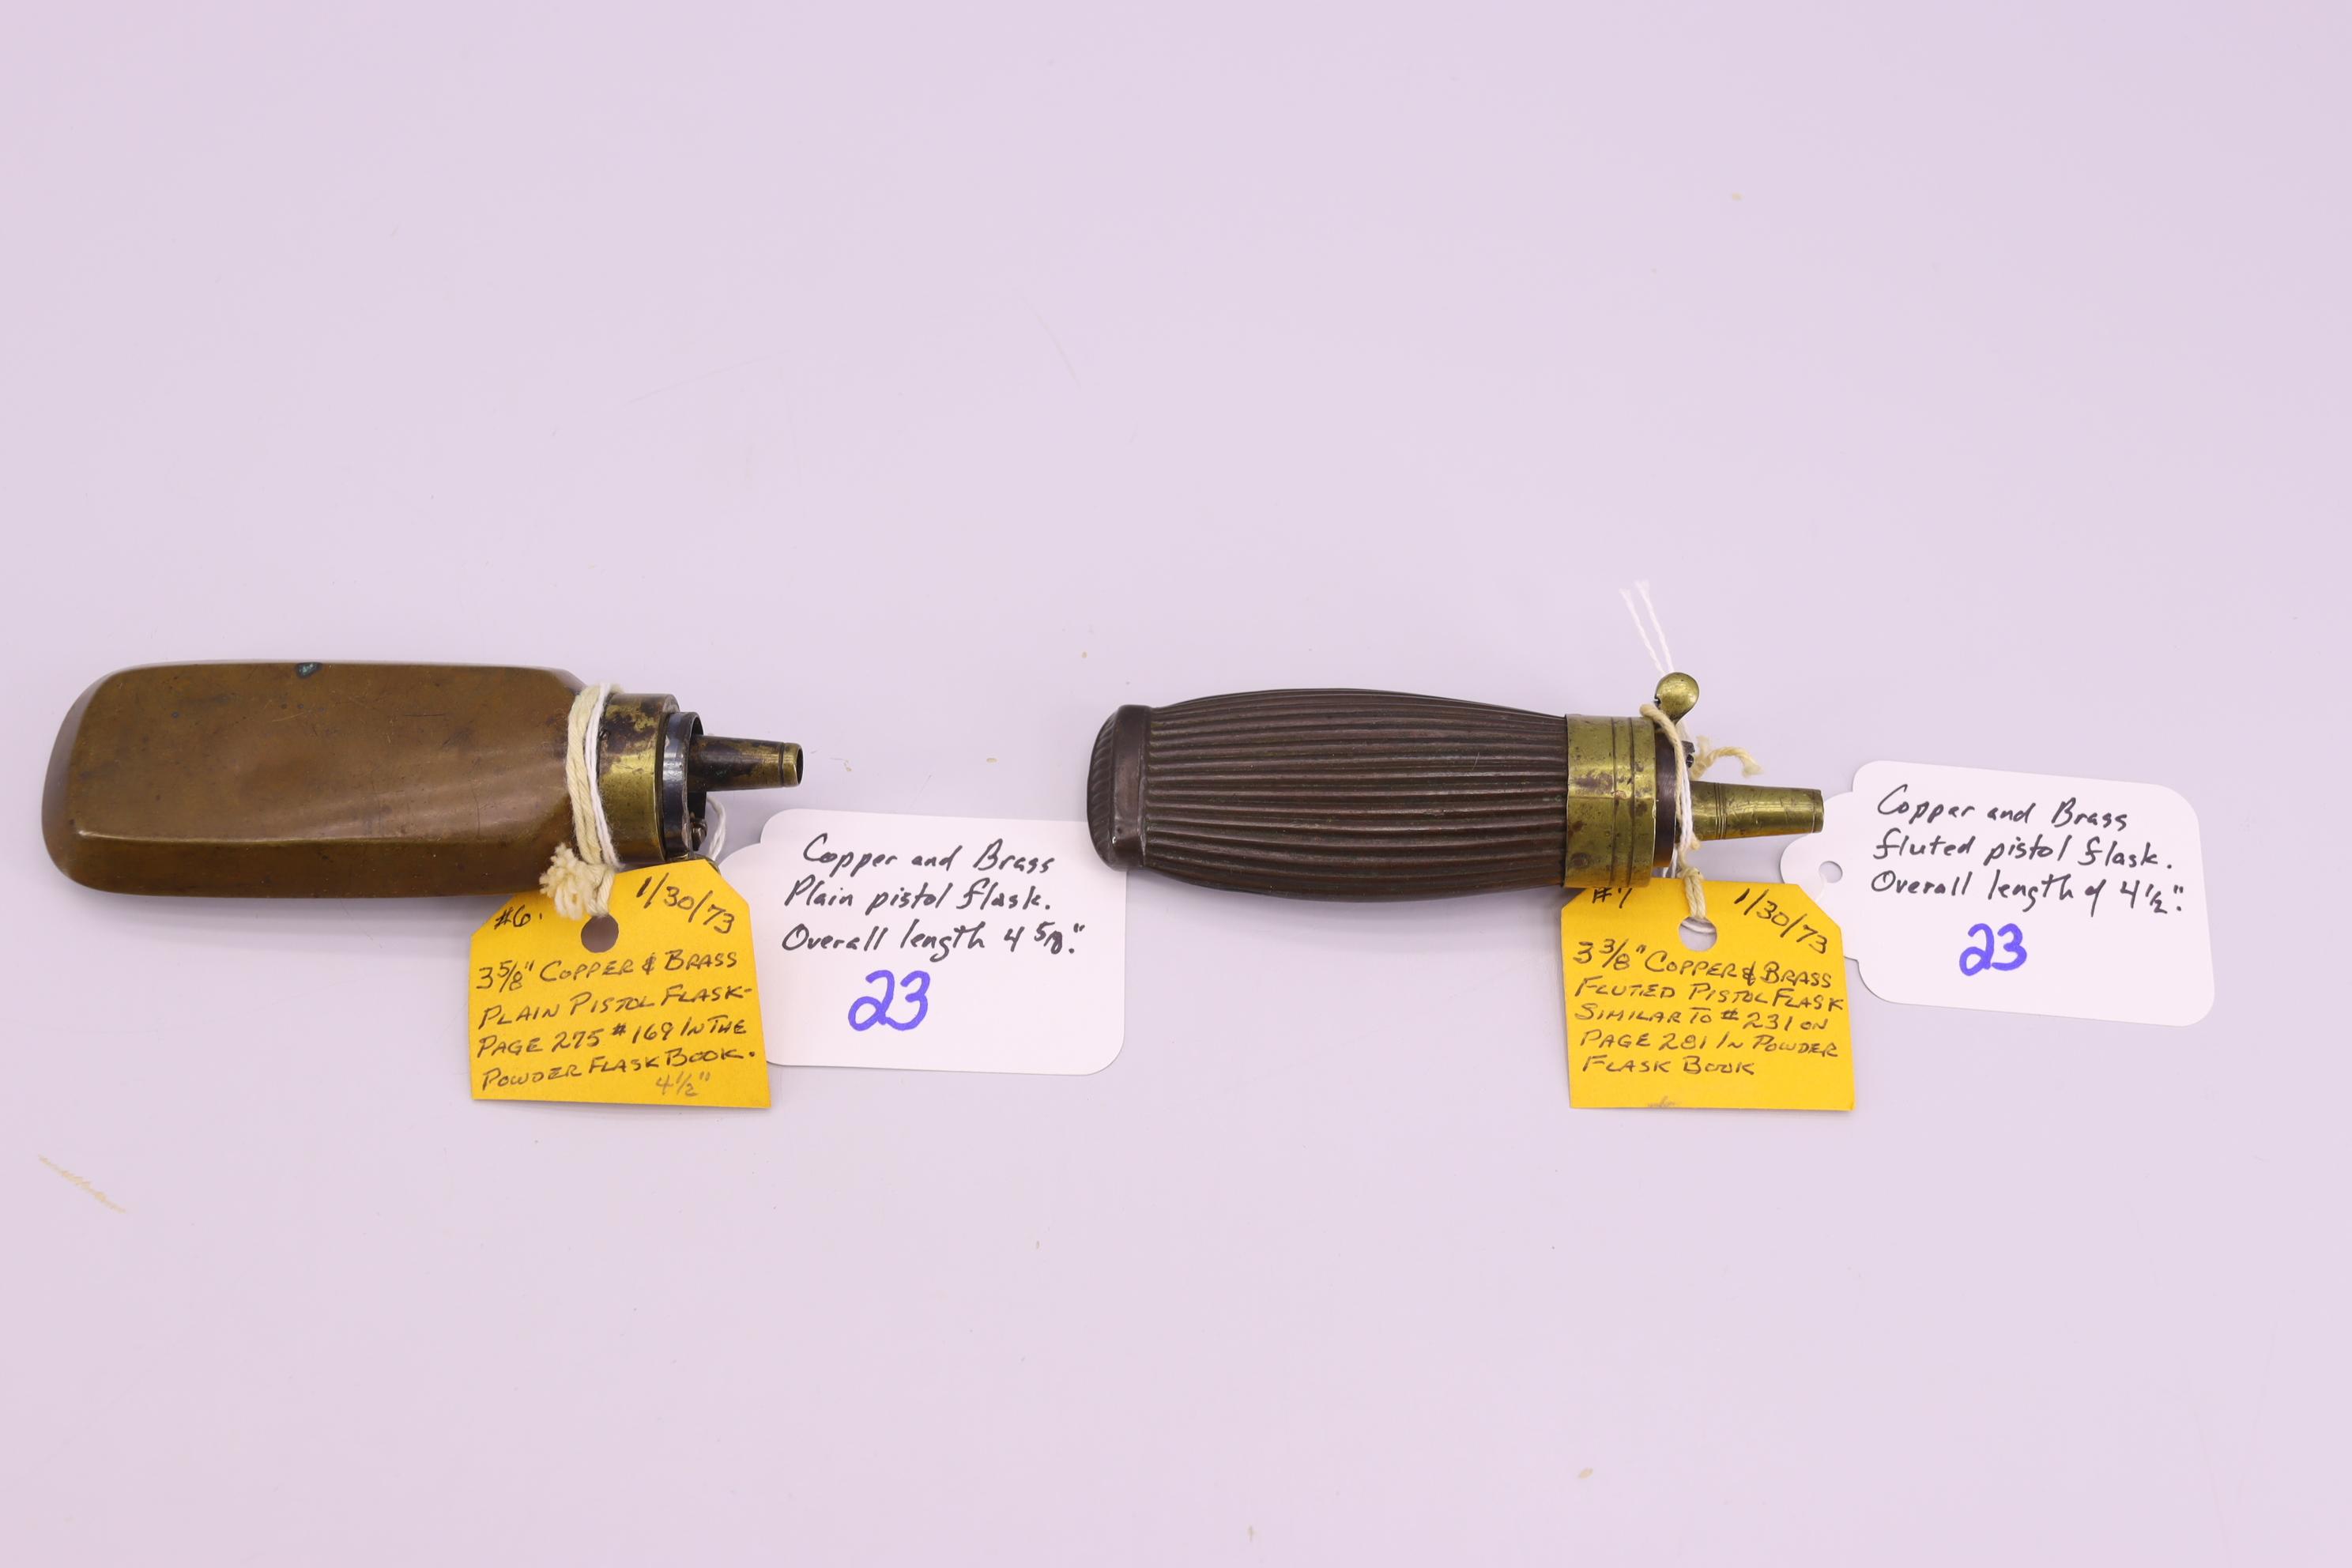 Pair of Powder Flasks – 1st Copper and Brass Fluted Pistol Flask, Overall Length is 4 ½” – 2nd Coppe